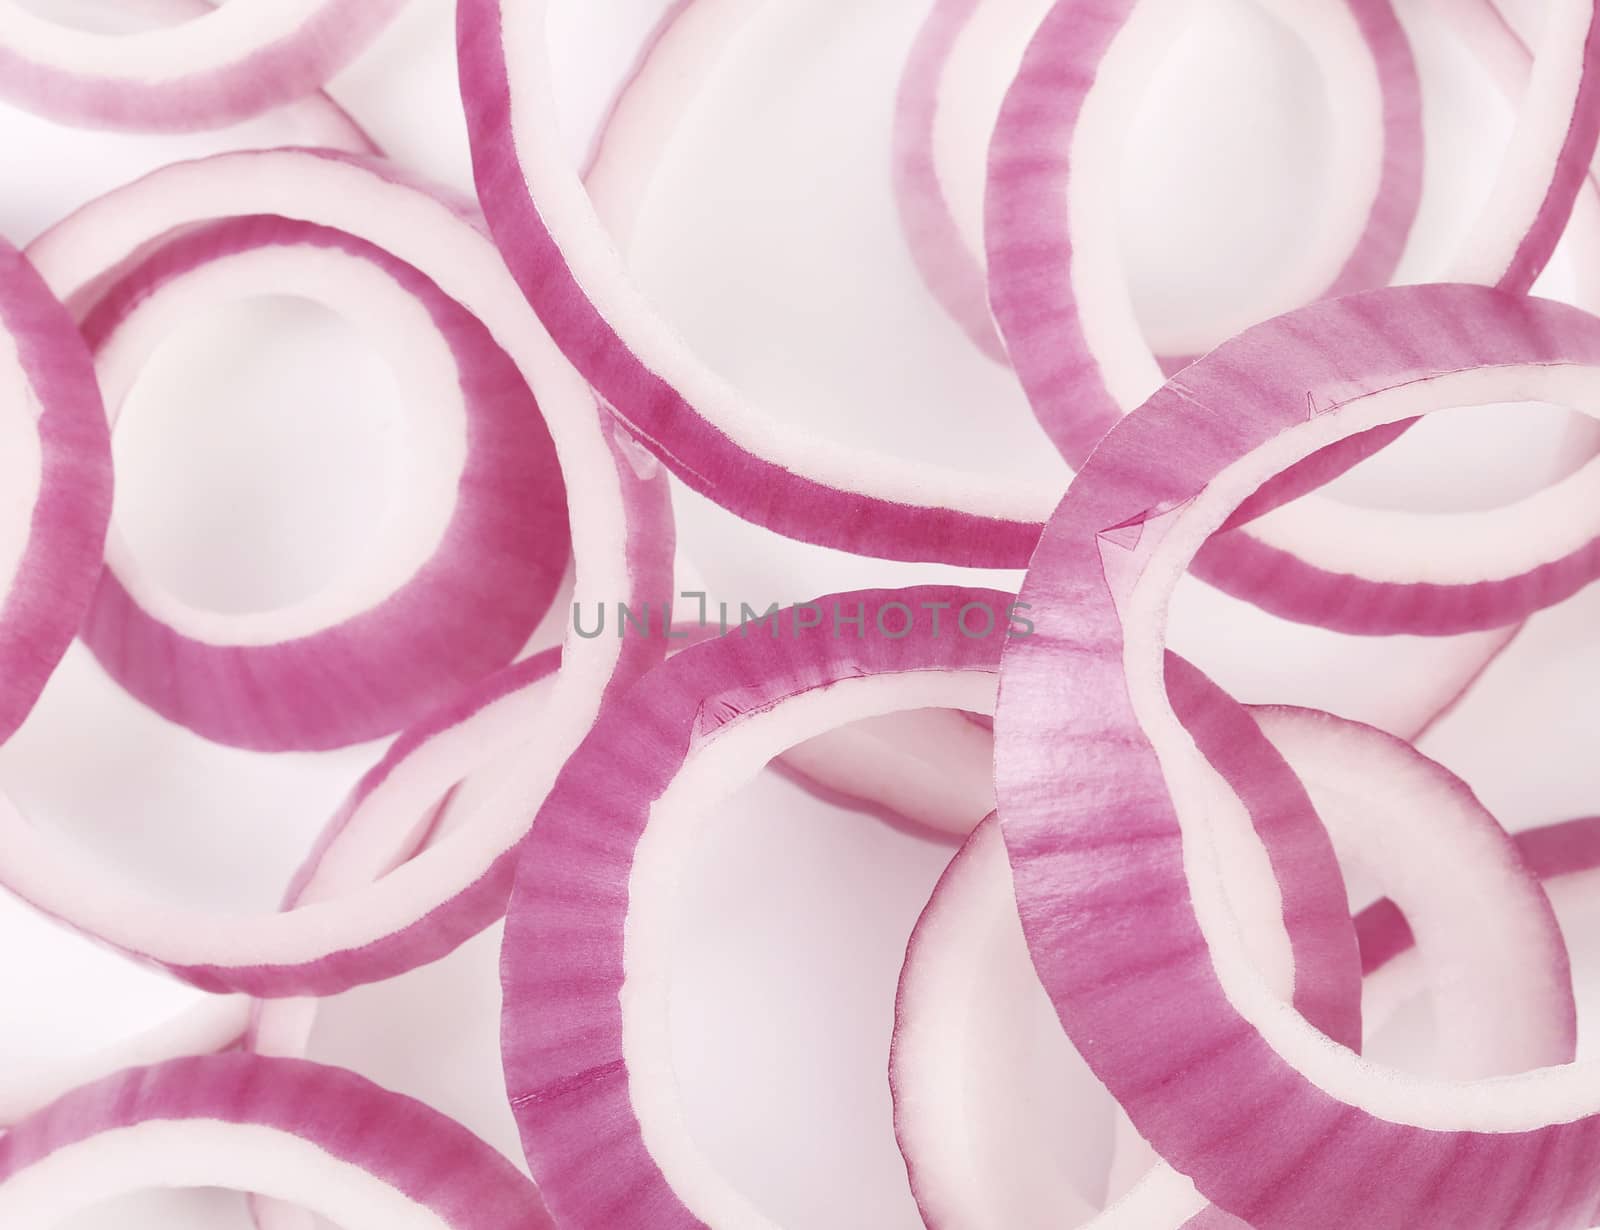 Rings of violet onion. Close up. White background.